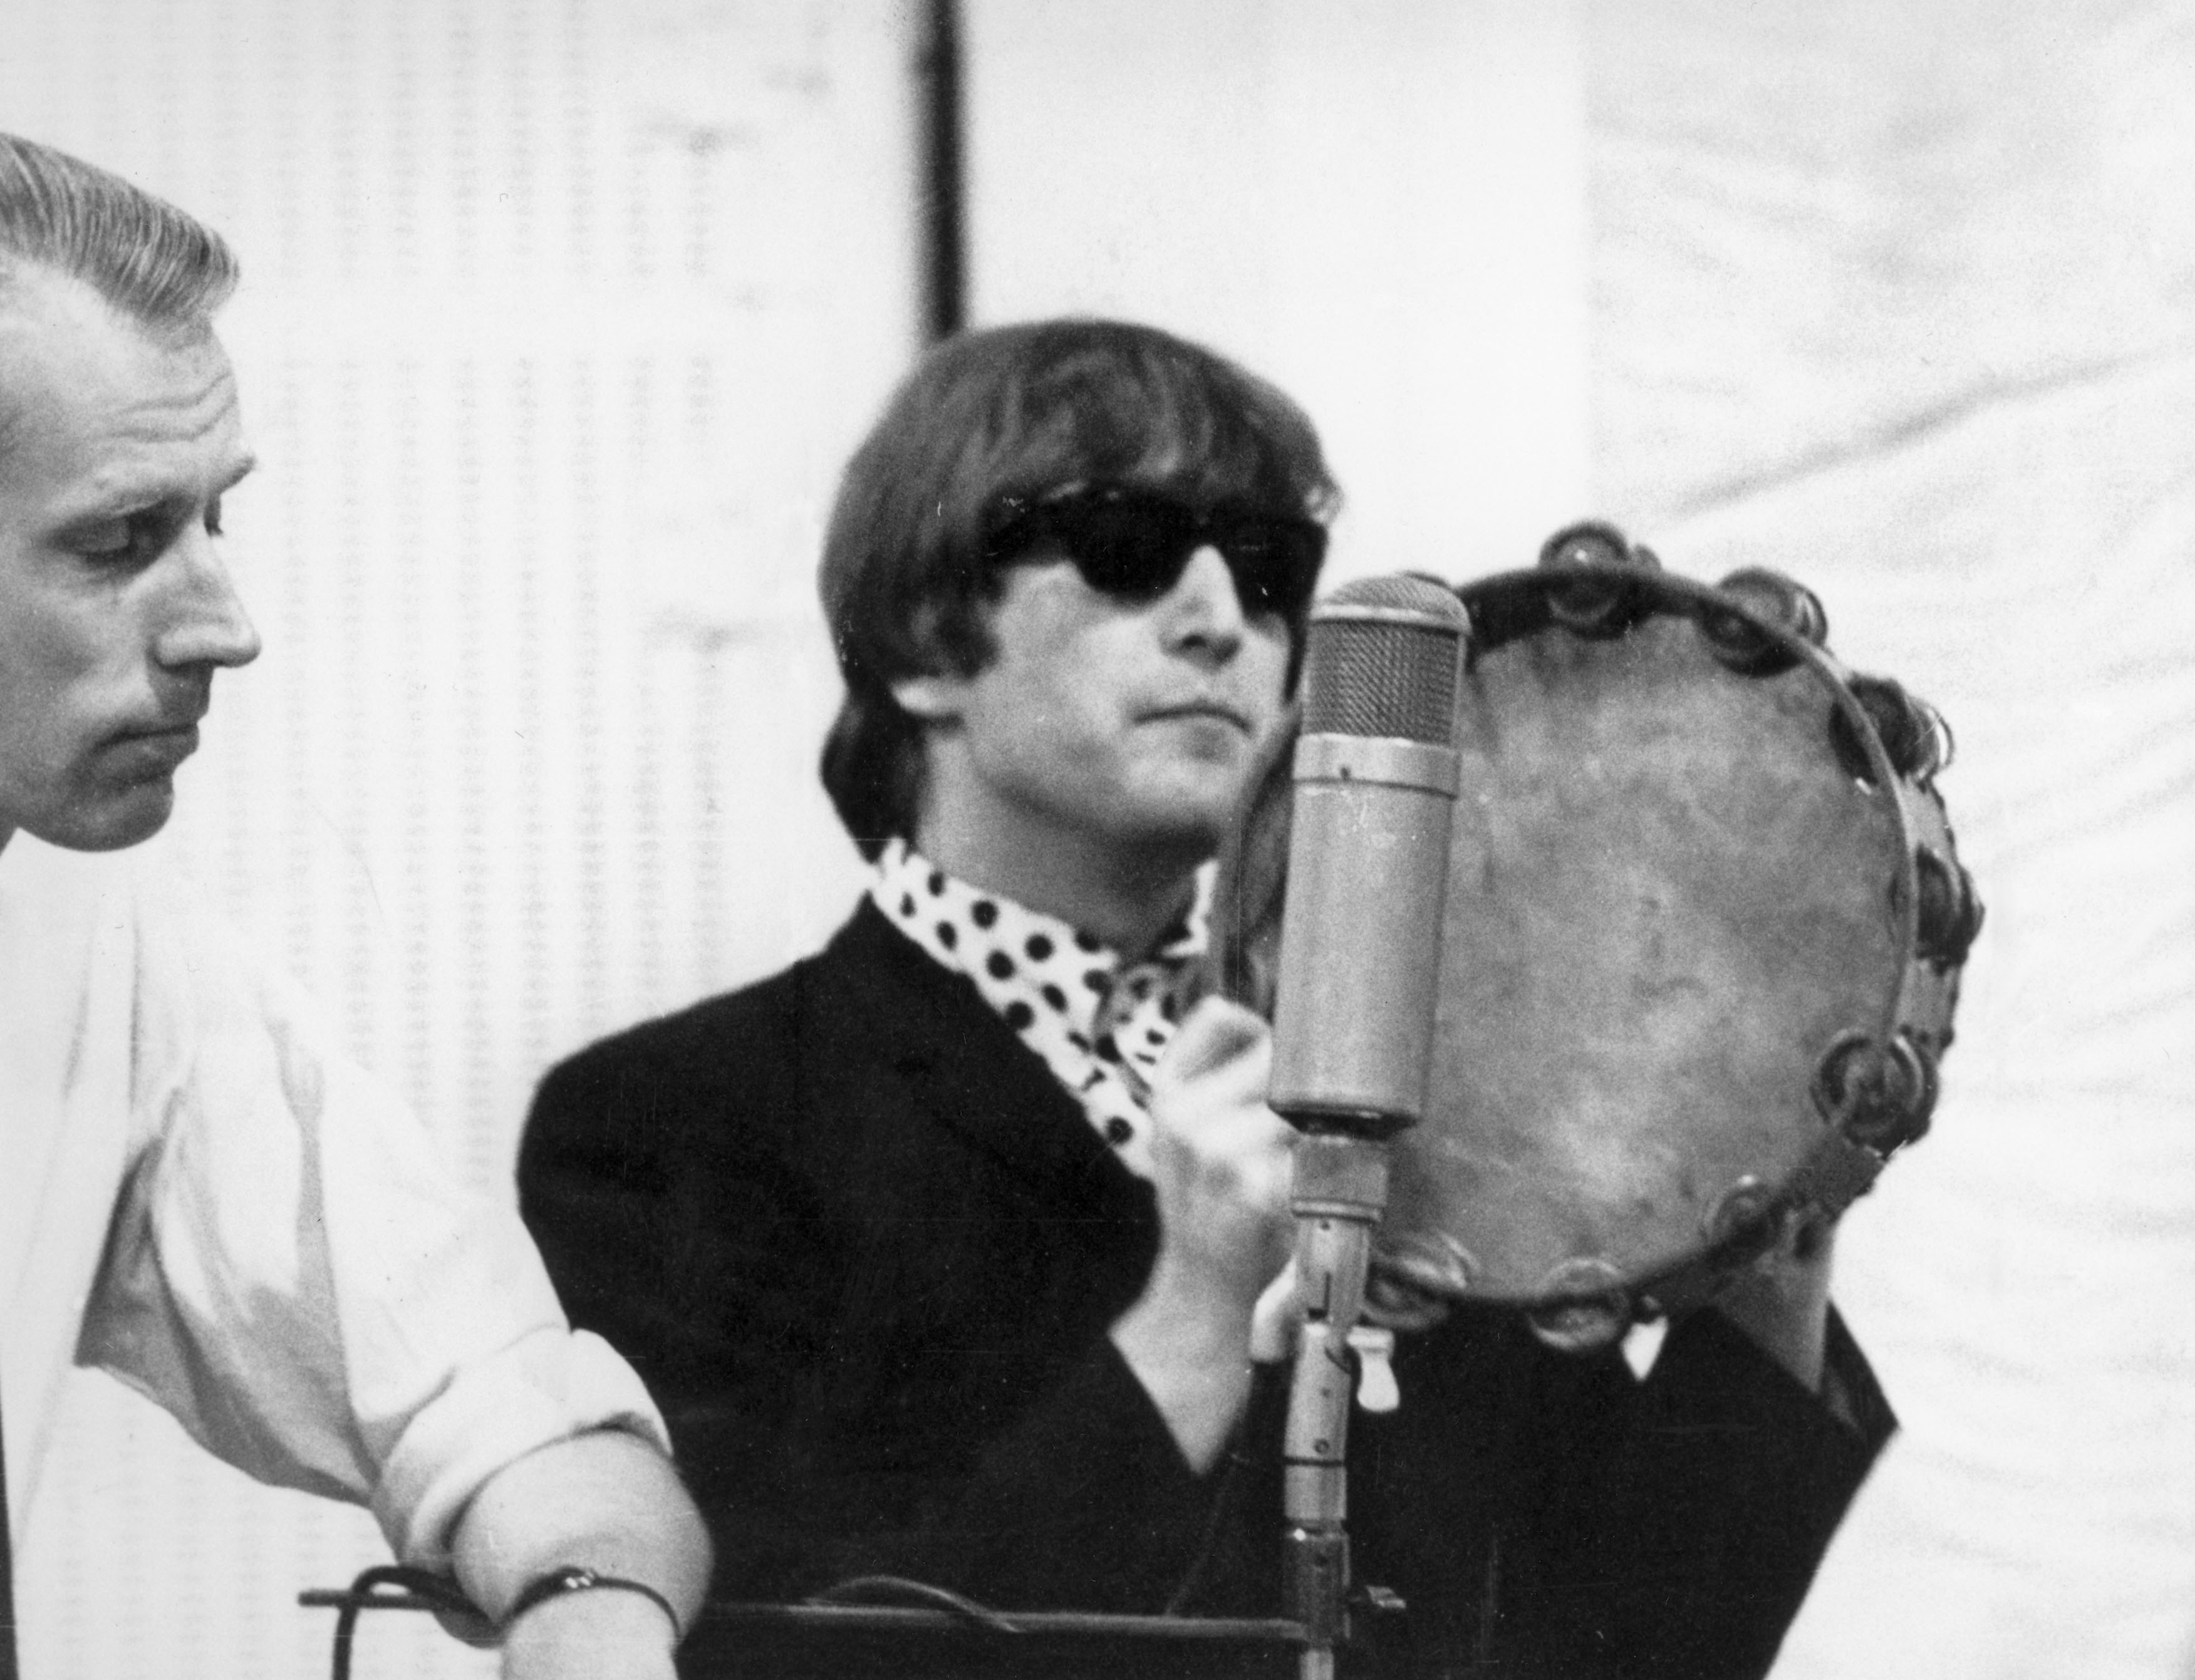 George Martin and John Lennon at a recording session for The Beatles